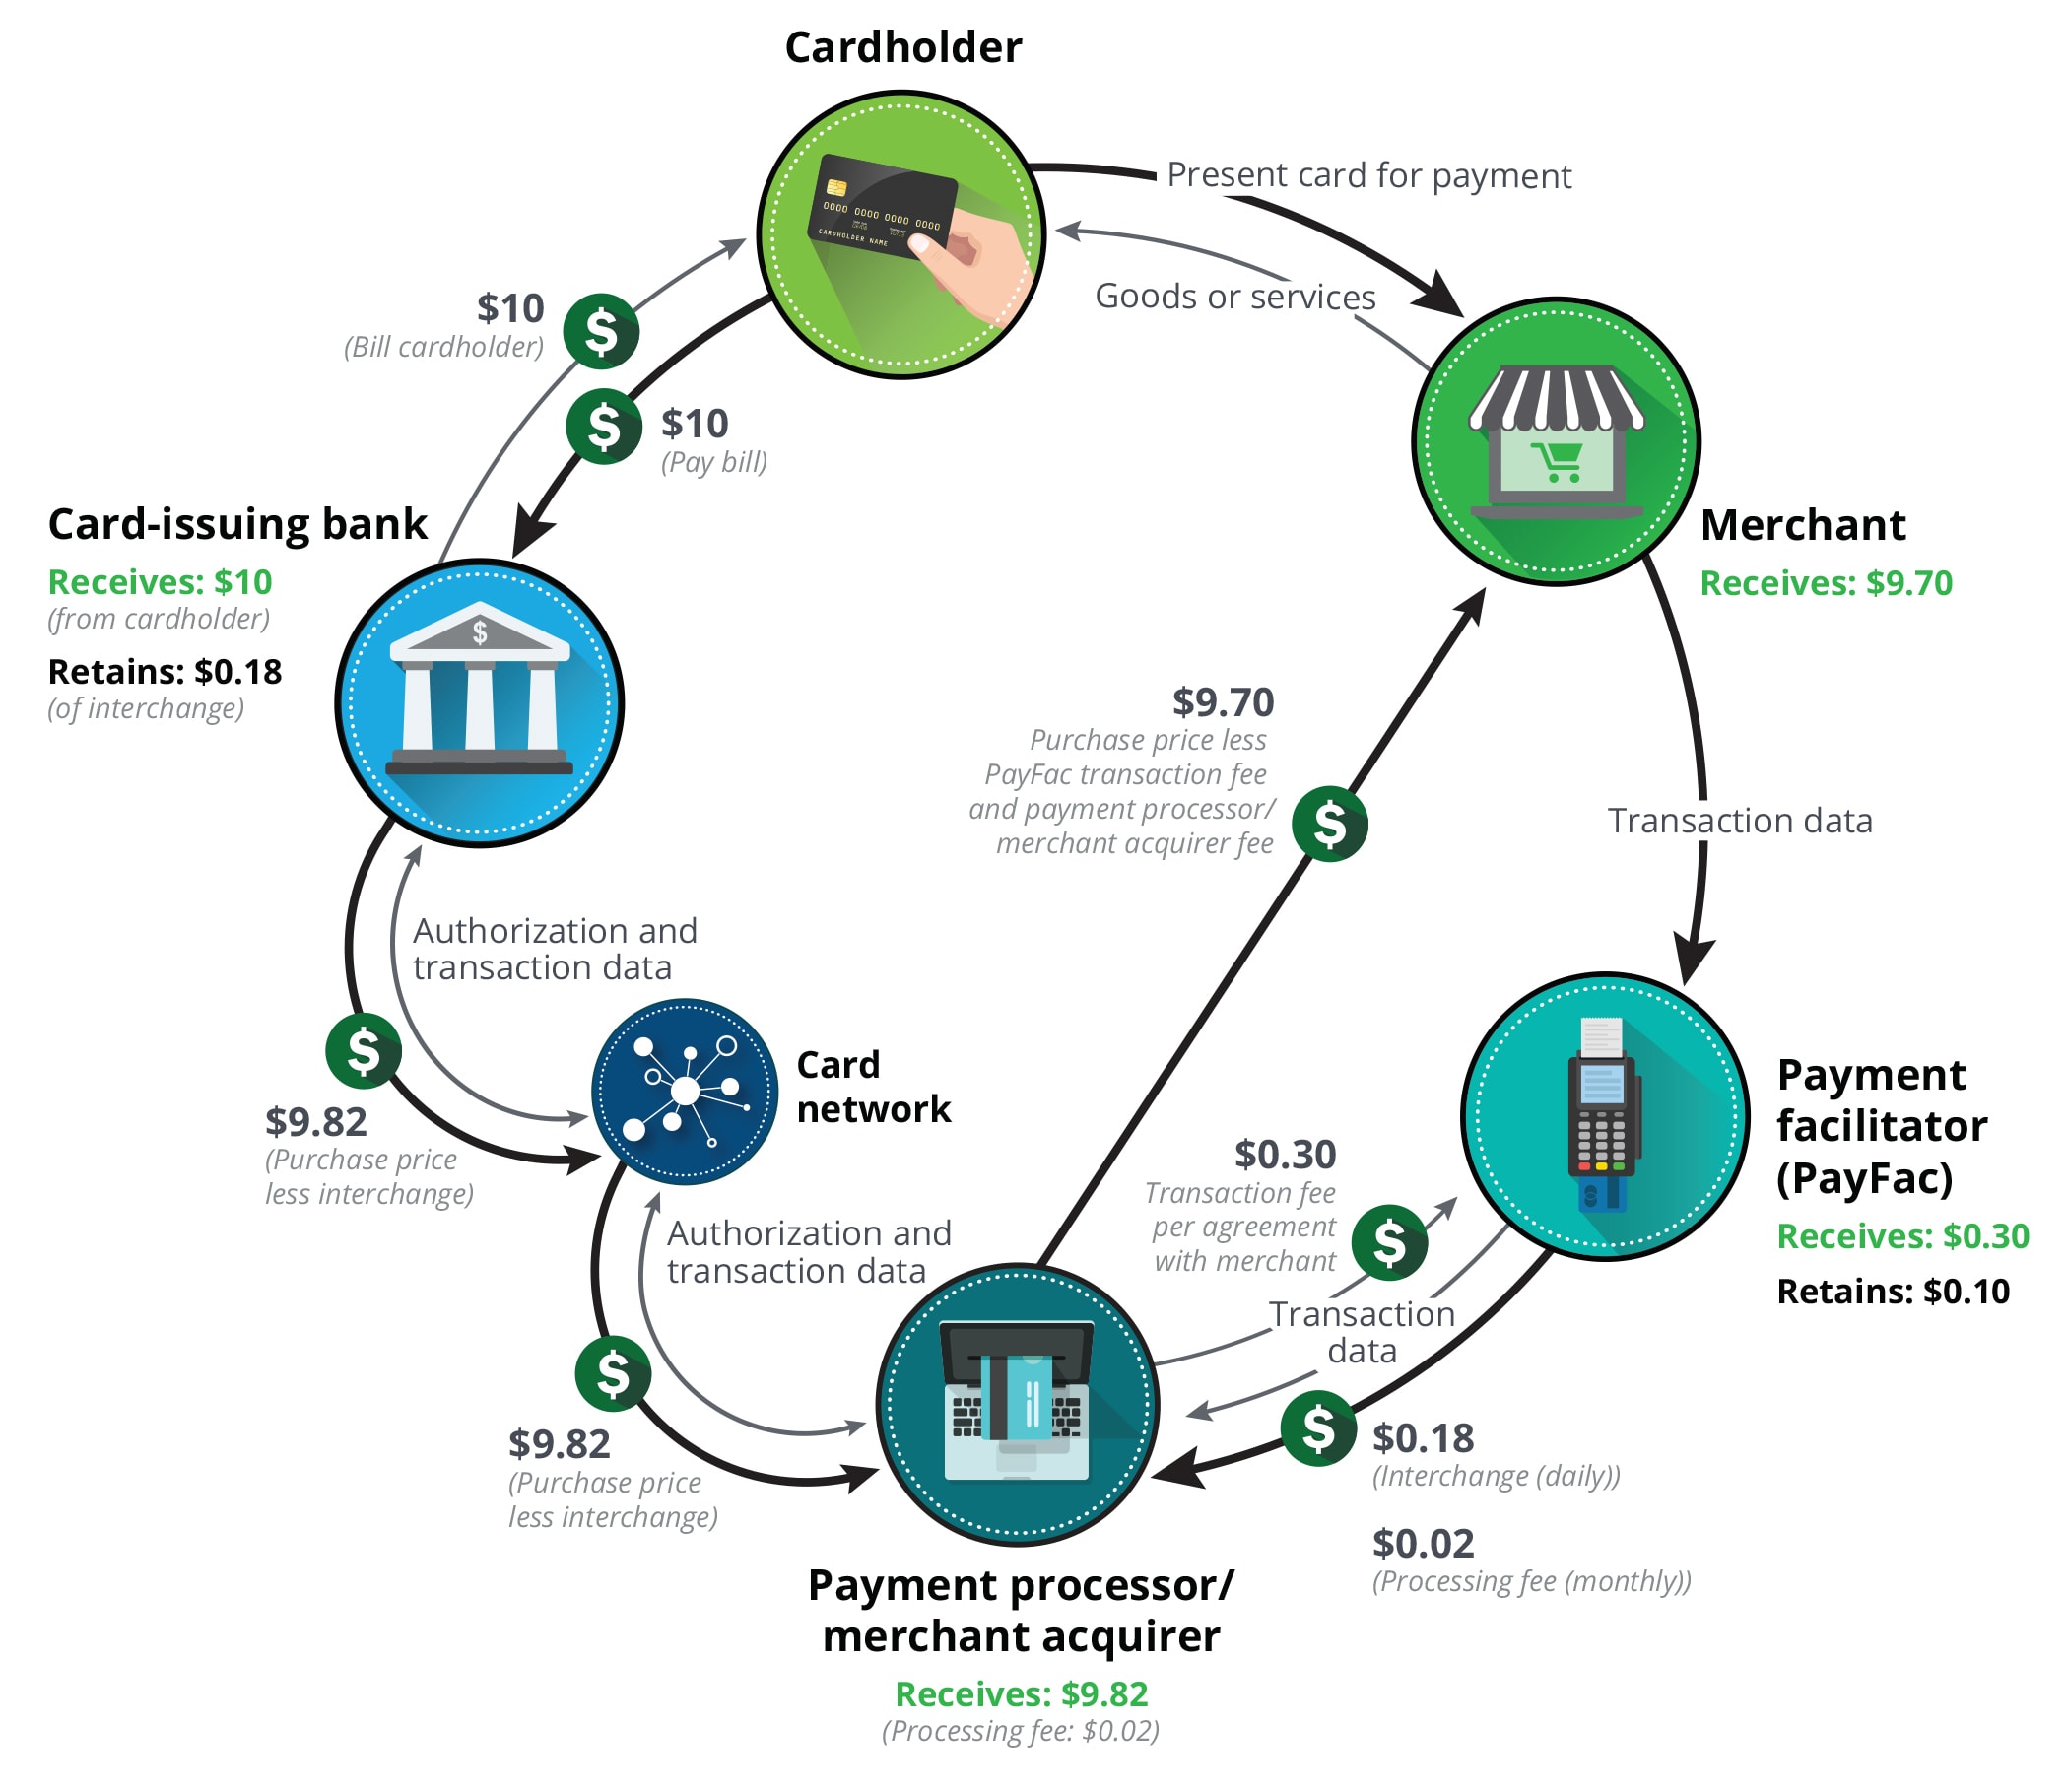 Revenue Recognition Standard in the Payments Industry | Deloitte US